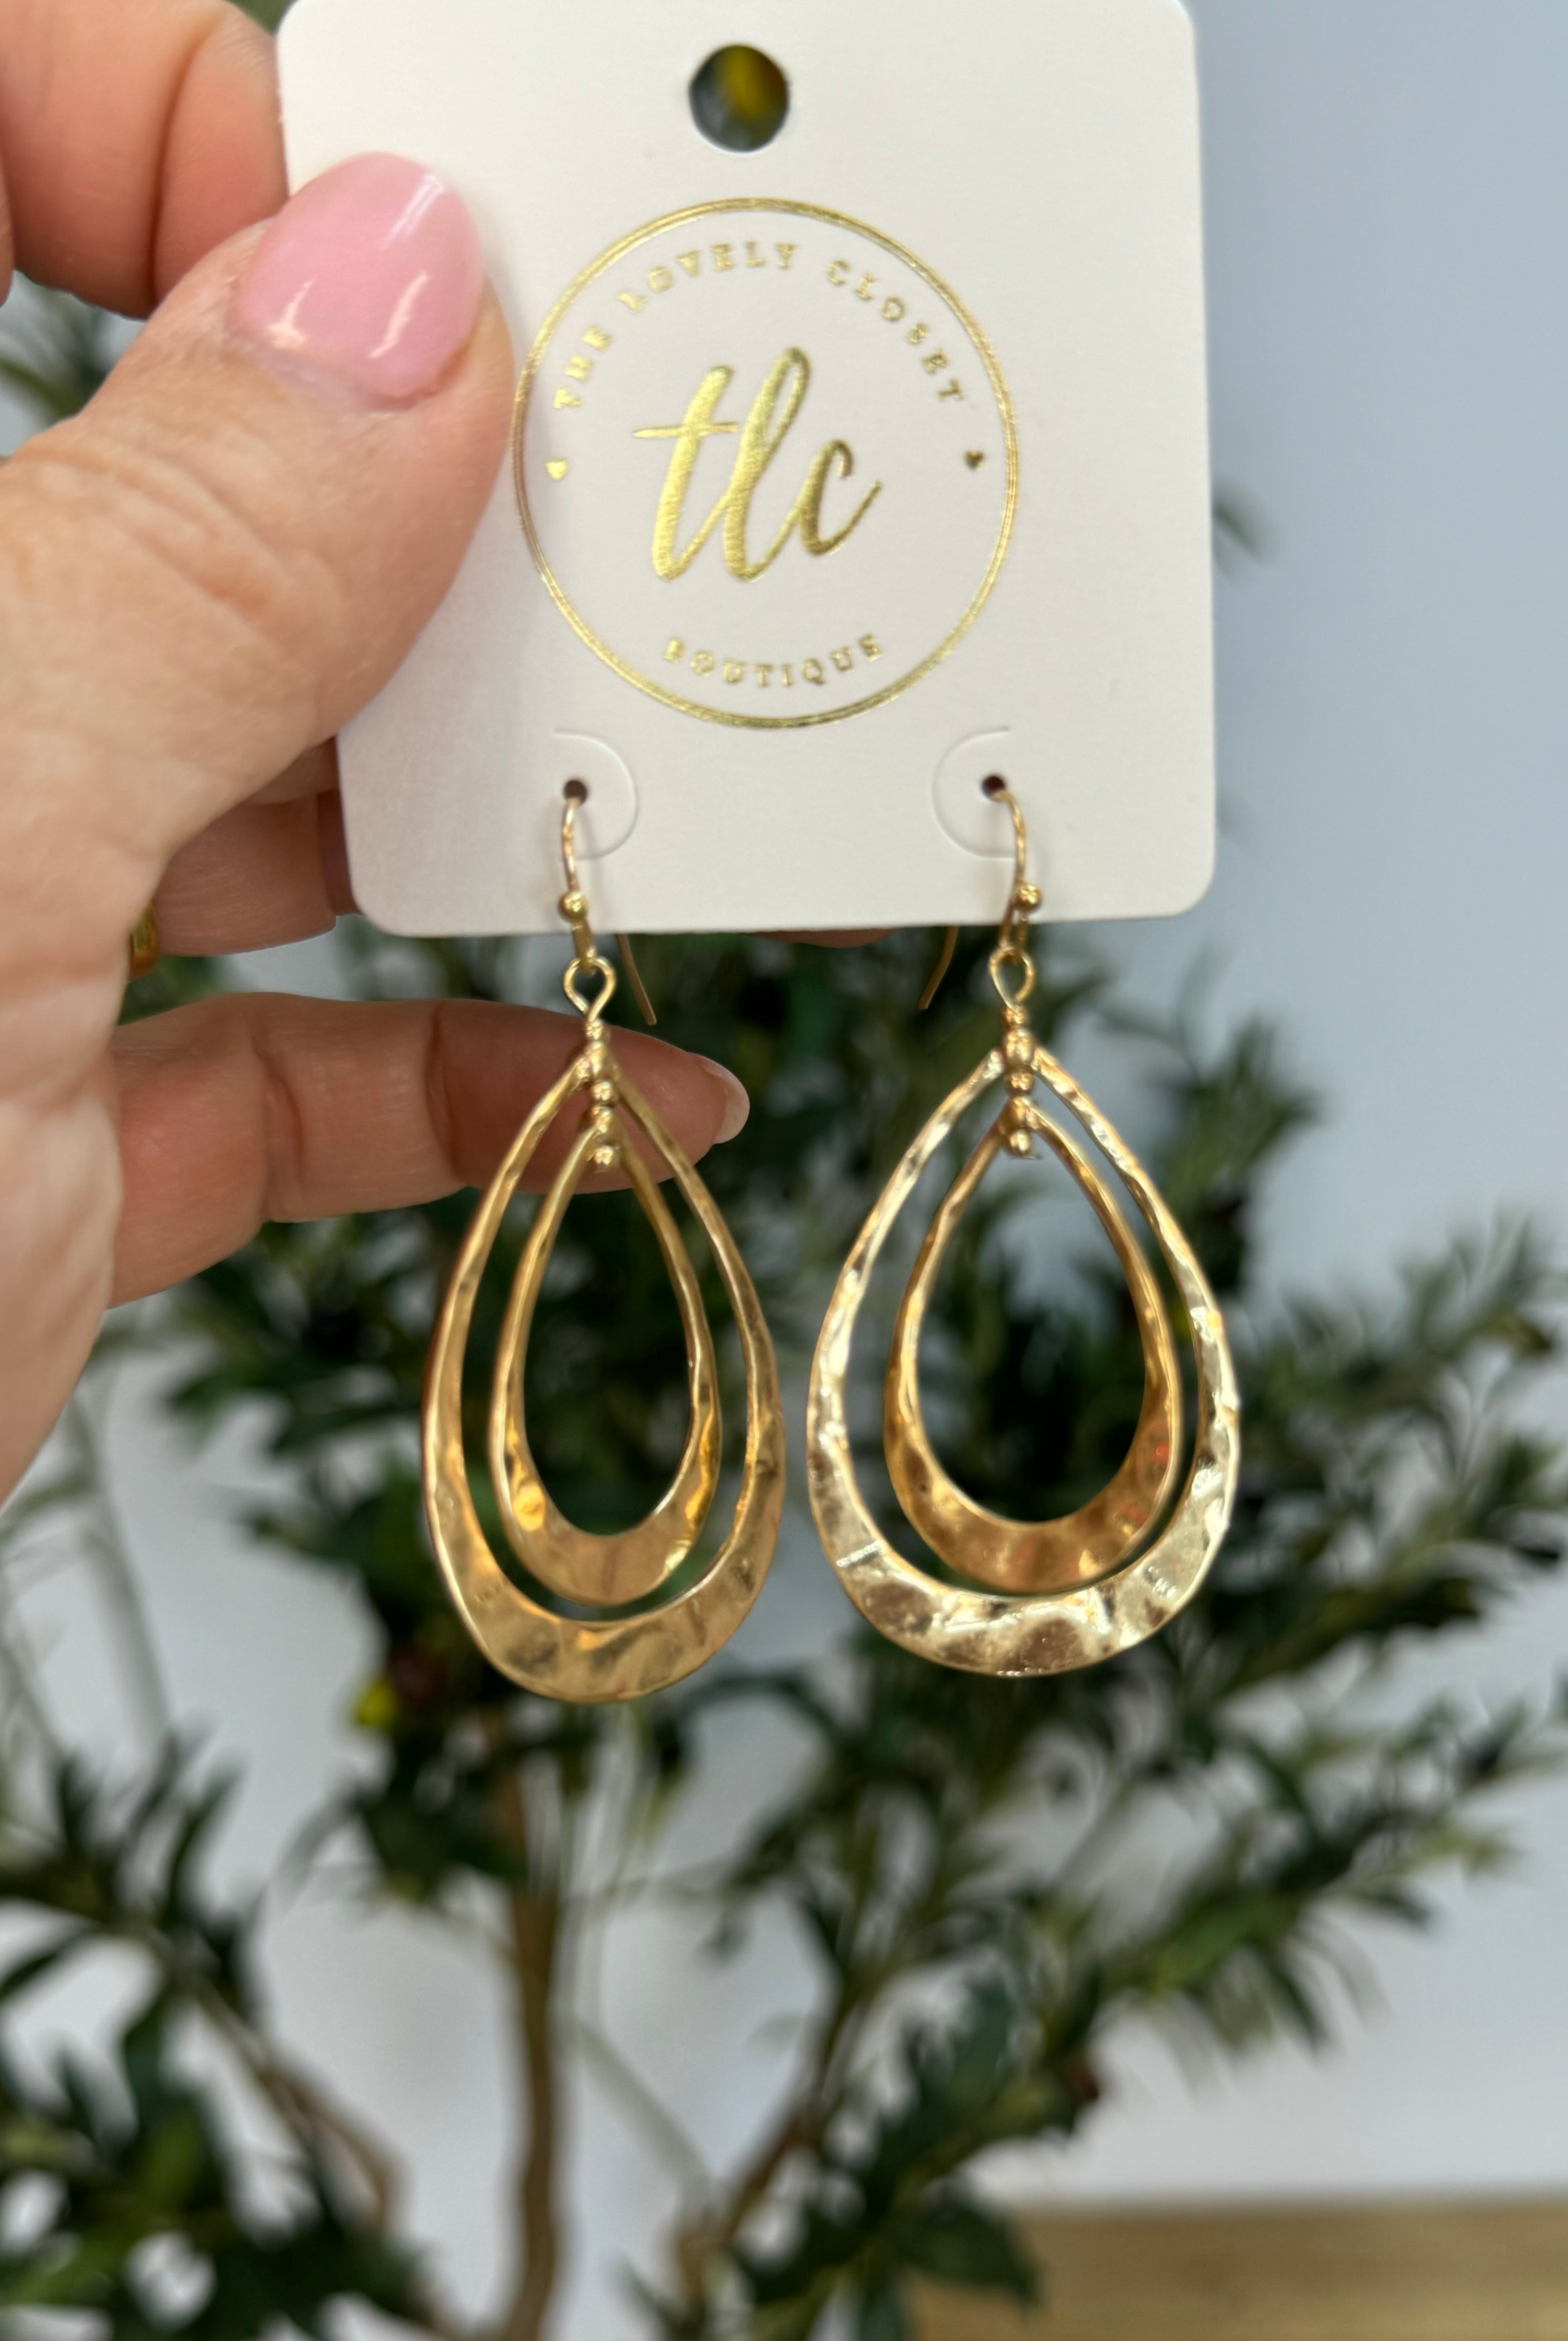 Hammered Metal Teardrop Earrings - Gold-250 Jewelry-The Lovely Closet-The Lovely Closet, Women's Fashion Boutique in Alexandria, KY